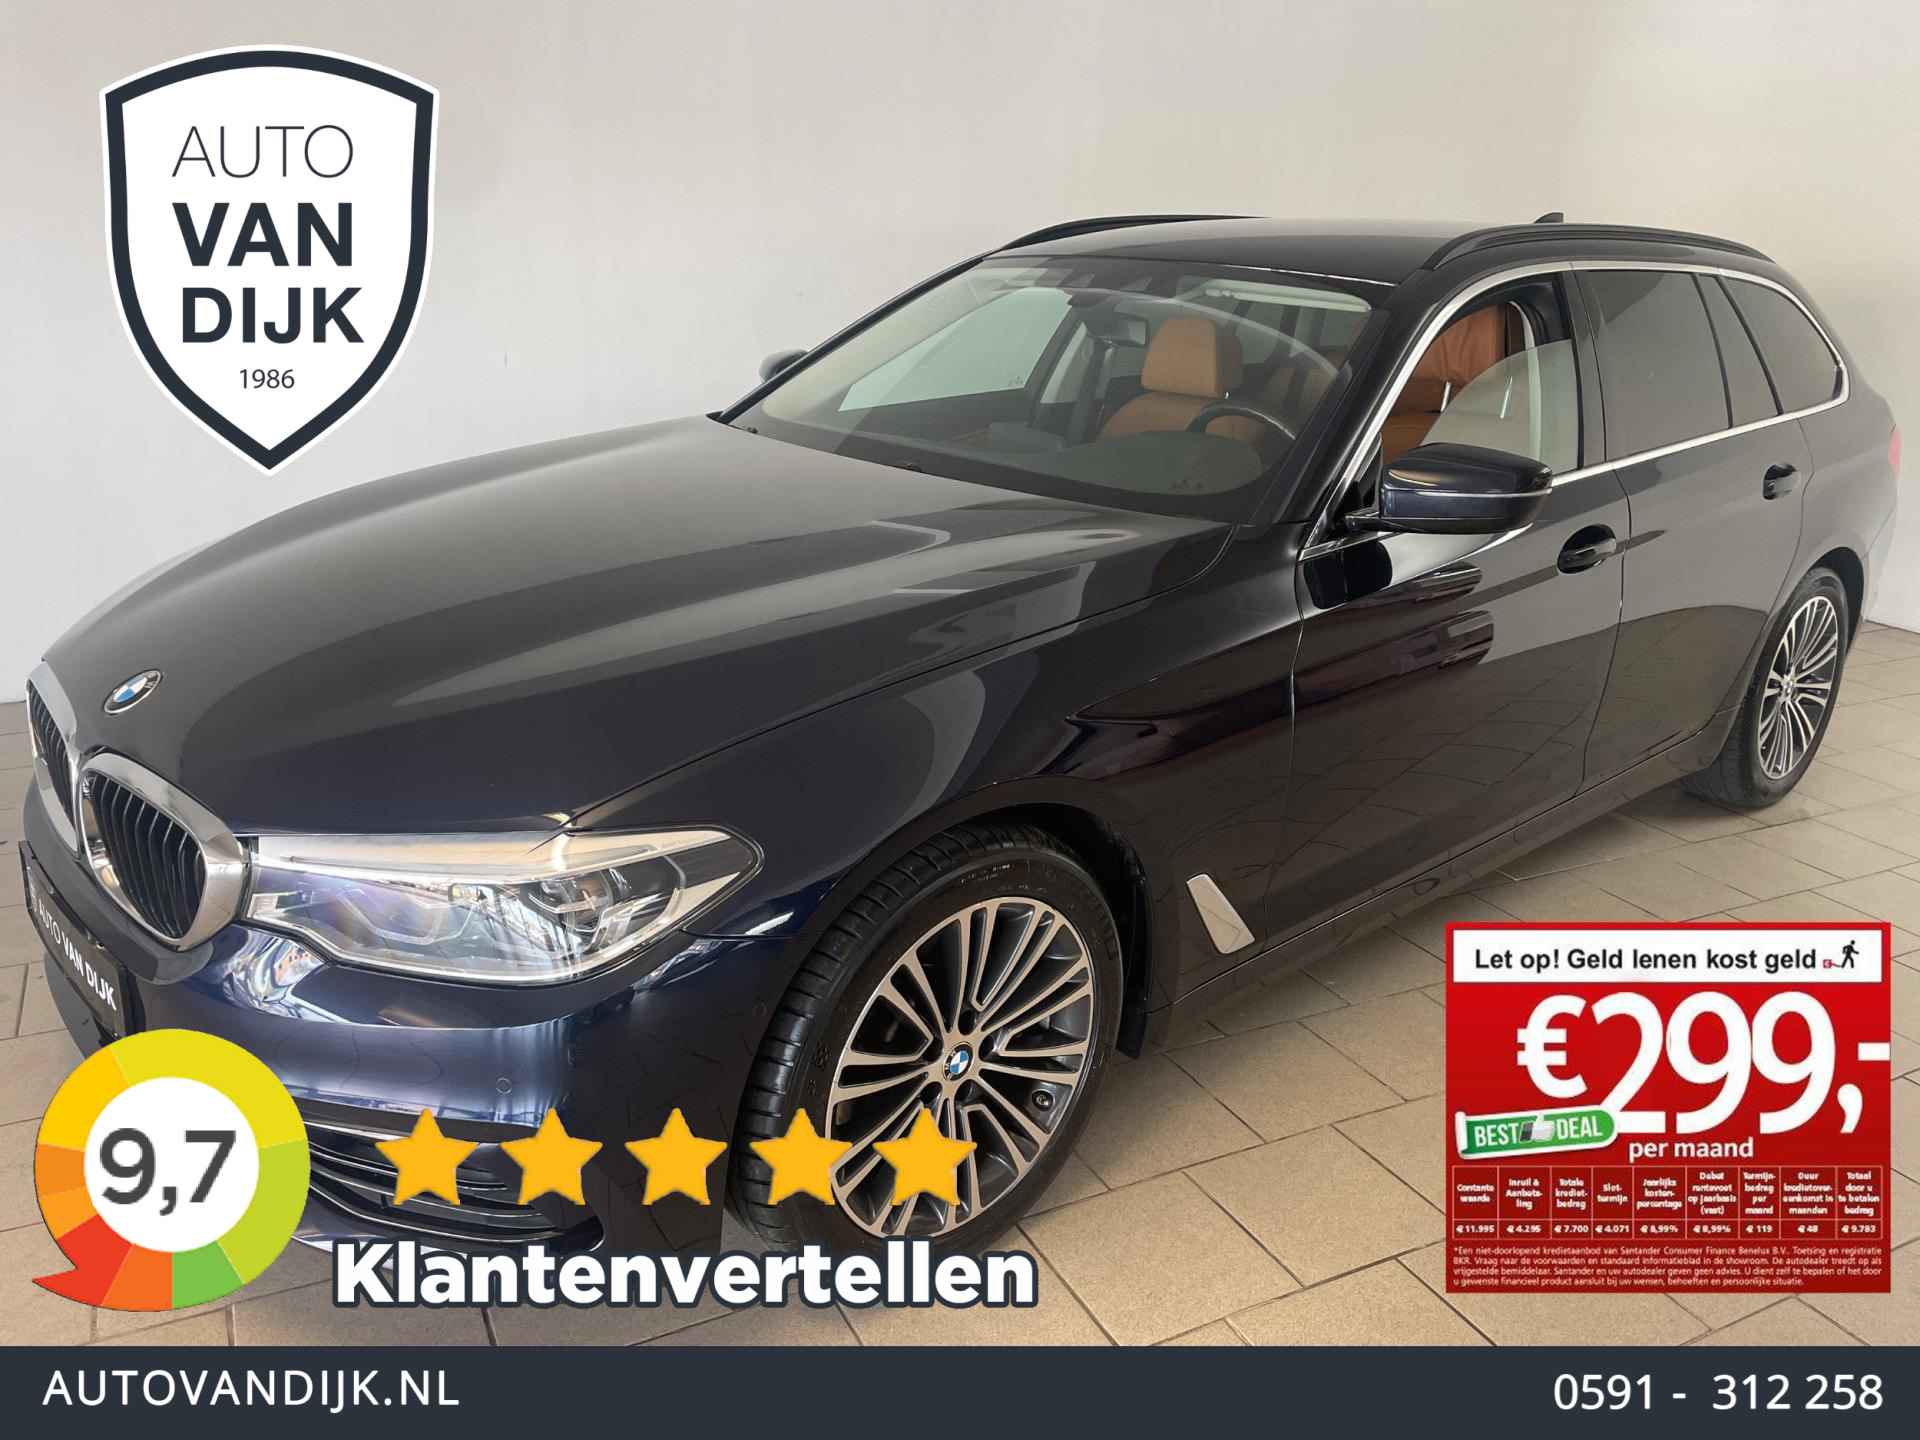 BMW 5-serie Touring 520i High Executive AUTOMAAT NAVI CRUISE BLUETOOTH LED VERL STUURVERW STOELVERW STOELVENT LEDER NIEUWSTAAT - 1/57